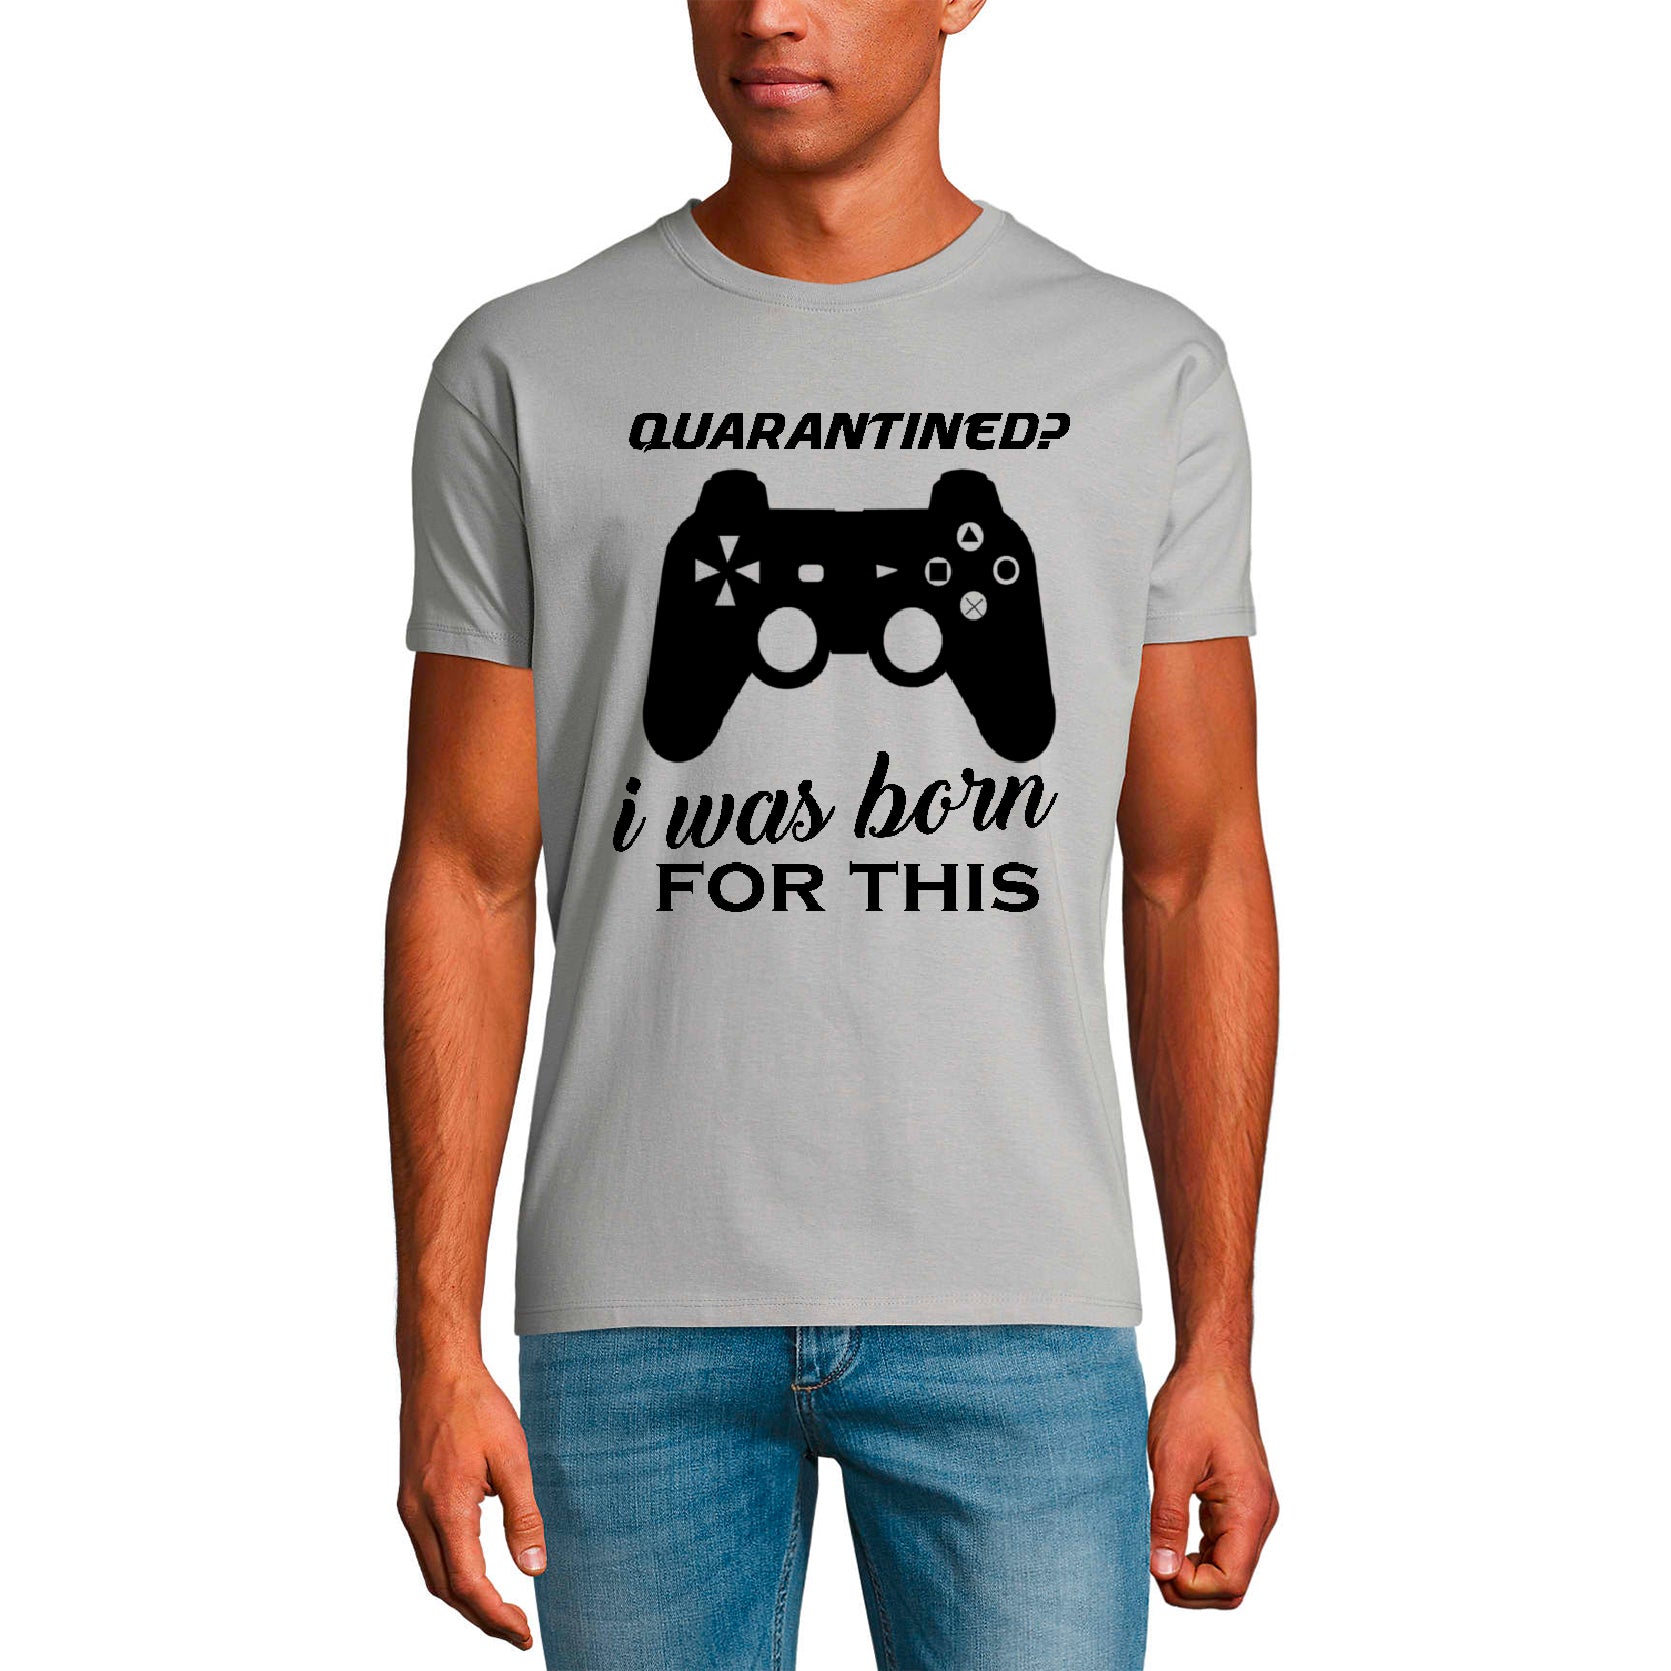 ULTRABASIC Men's T-Shirt Quarantined I Was Born for This - Gaming Shirt for Player mode on level up dad gamer i paused my game alien player ufo playstation tee shirt clothes gaming apparel gifts super mario nintendo call of duty graphic tshirt video game funny geek gift for the gamer fortnite pubg humor son father birthday